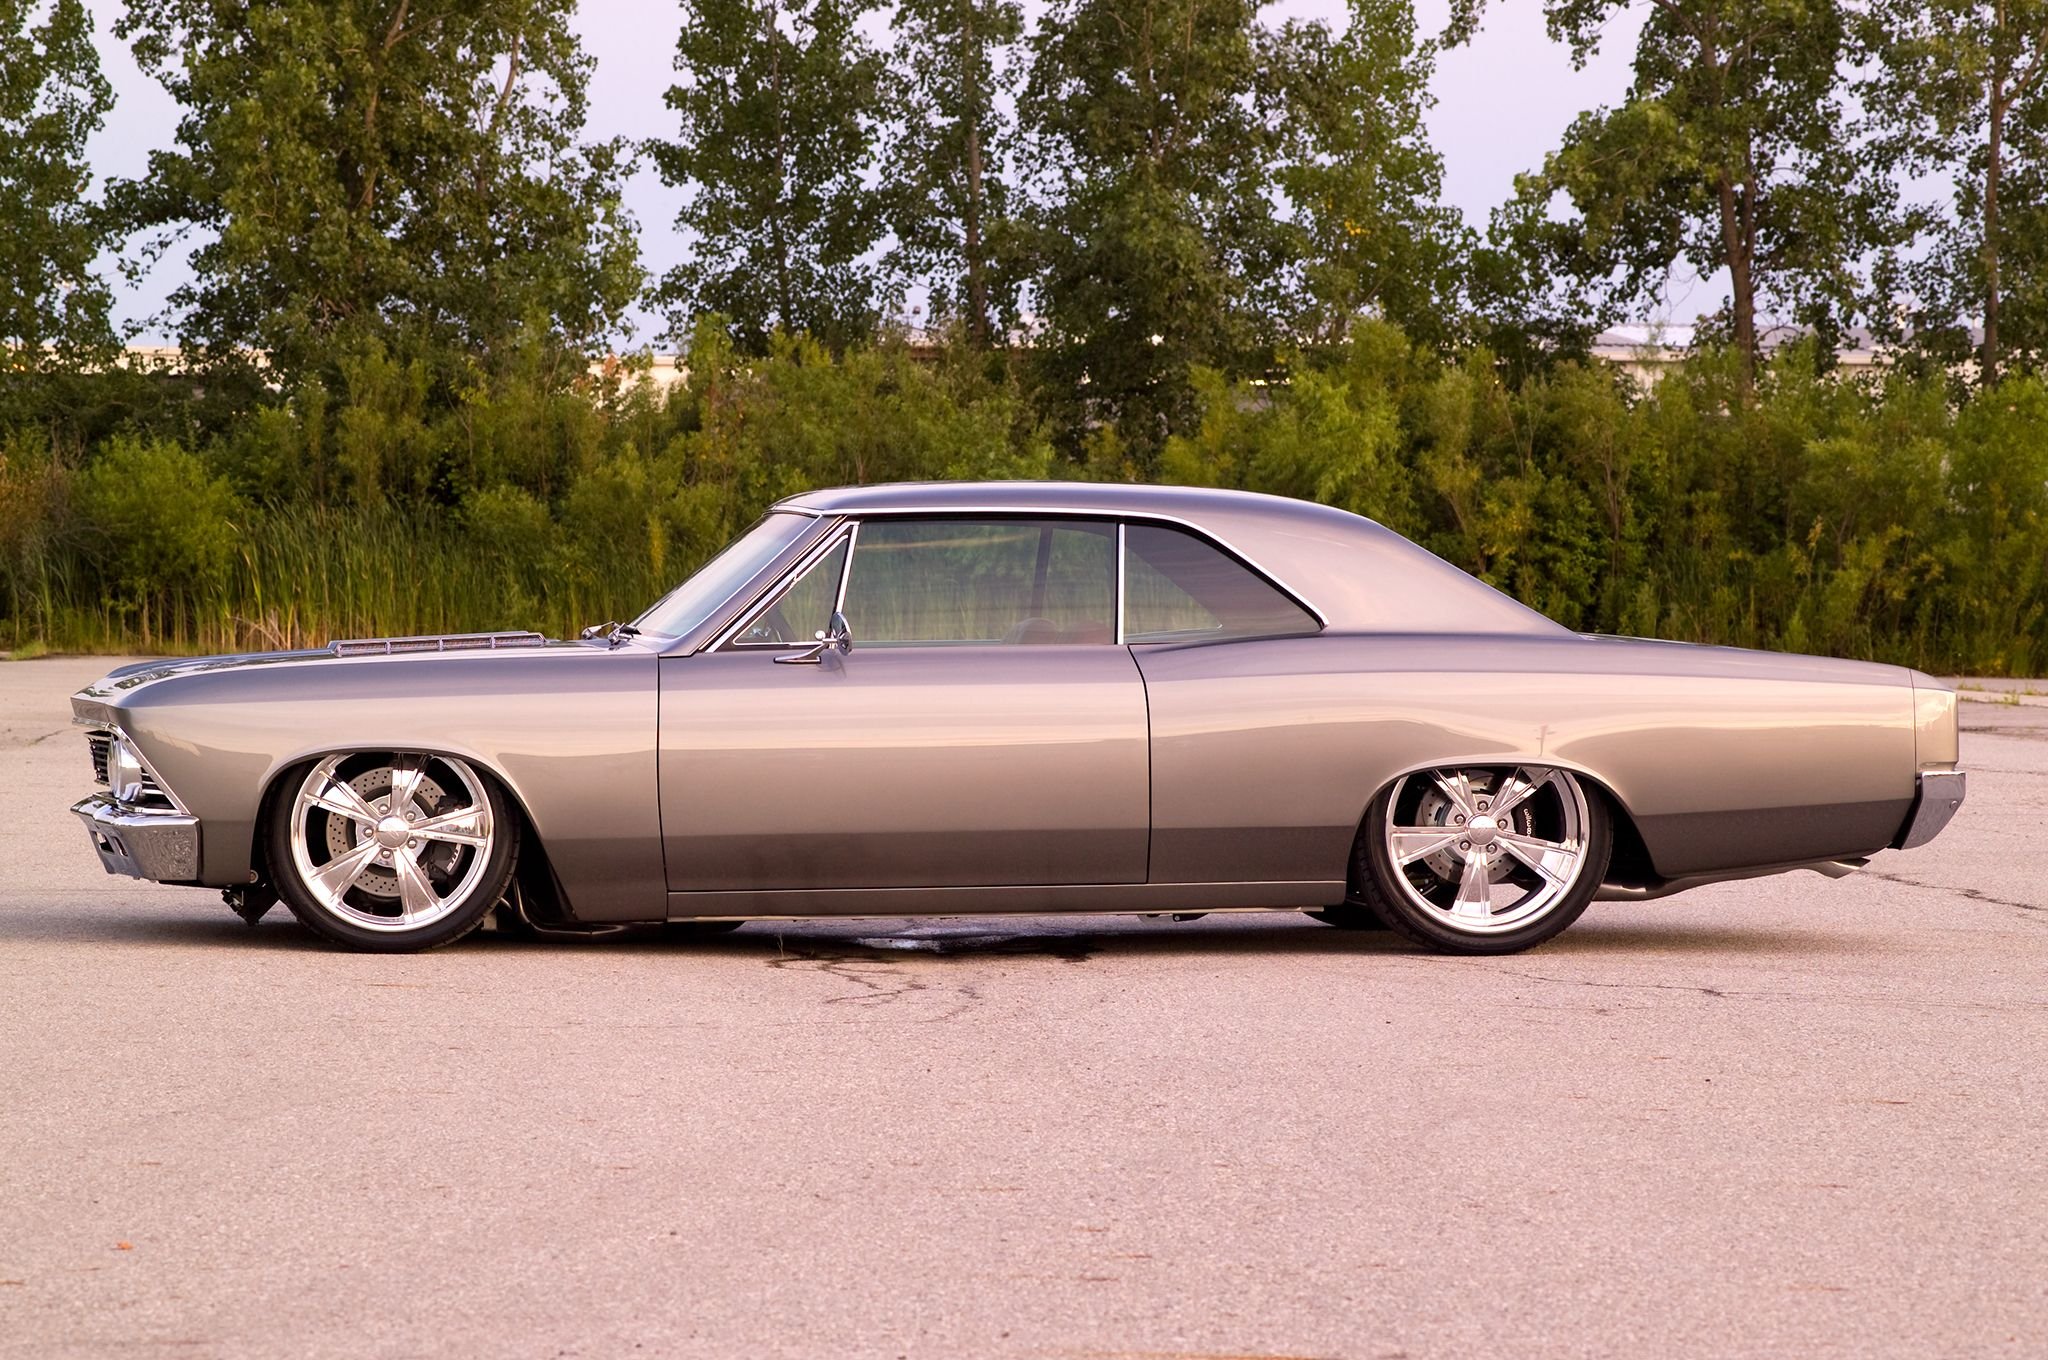 1966, Pro, Touring, 396, Chevelle, S s, Muscle, Classic, Hot, Rod, Rods, Hotrod, Custom, Chevy, Chevrolet Wallpaper